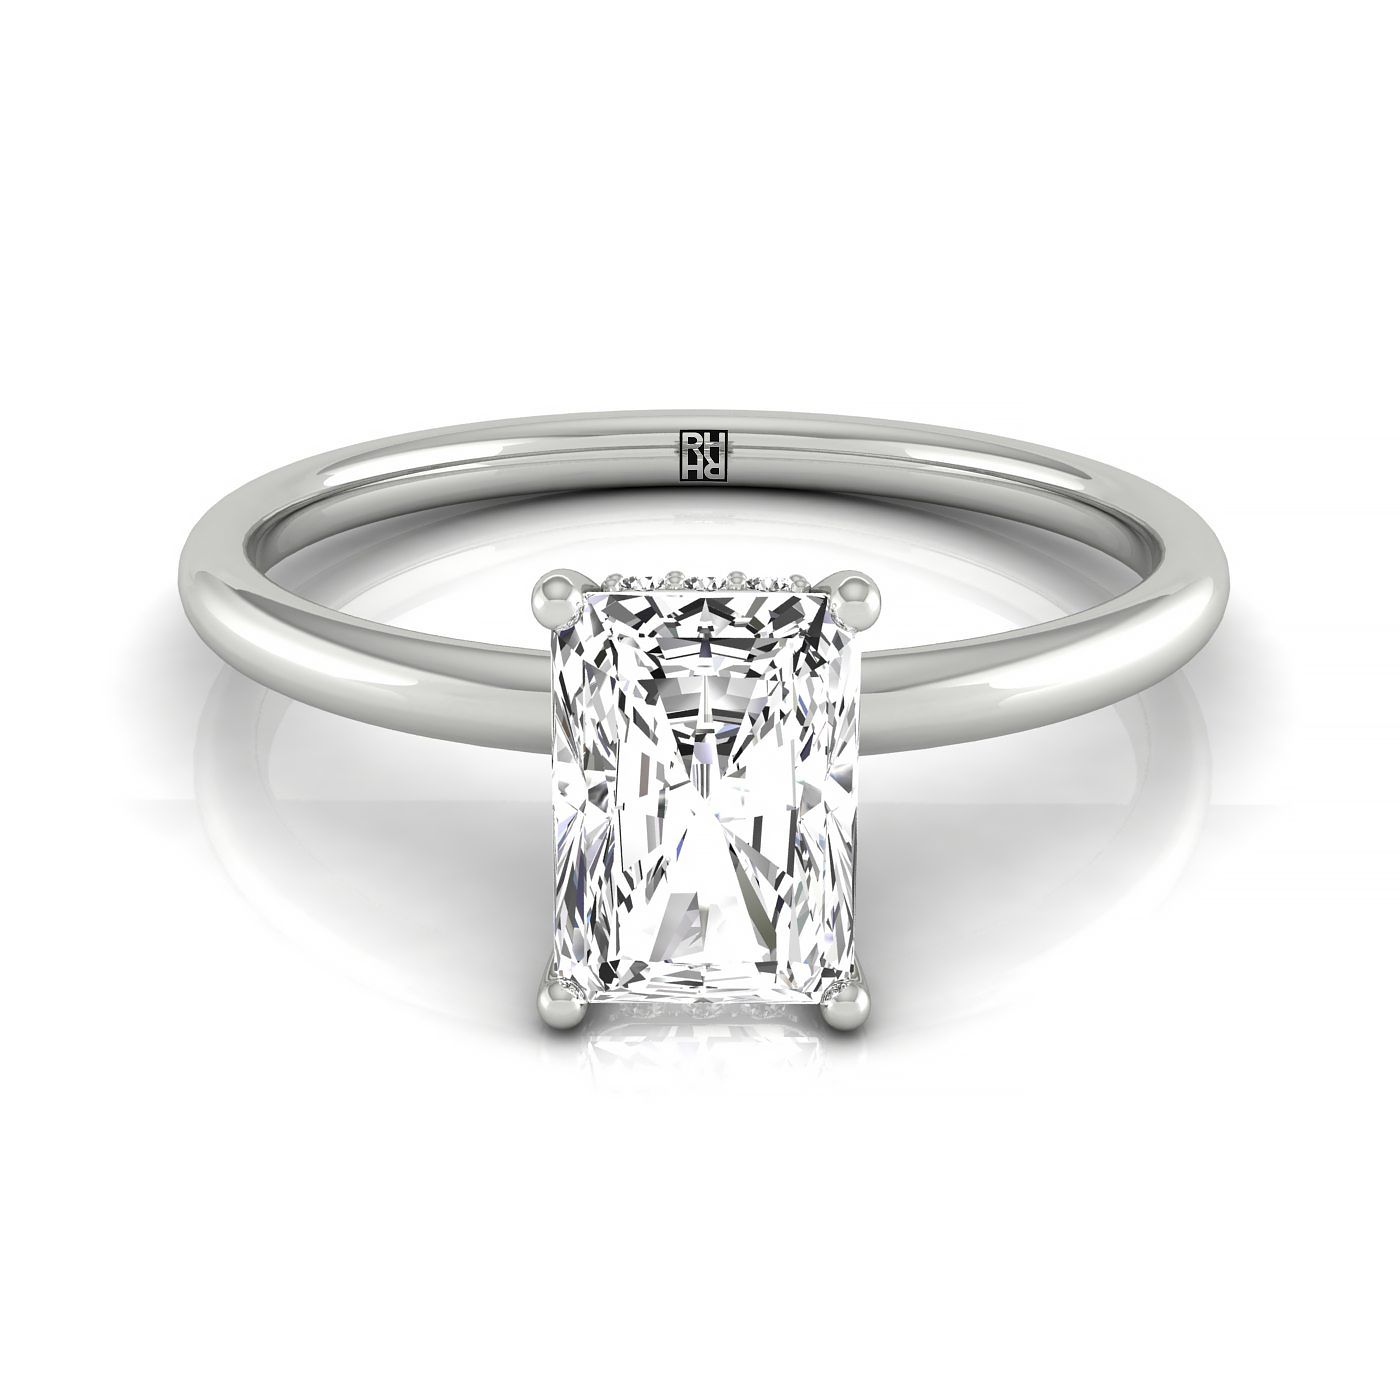 Plat Radiant Solitaire Engagement Ring With Upper Hidden Halo With 16 Prong Set Round Diamonds